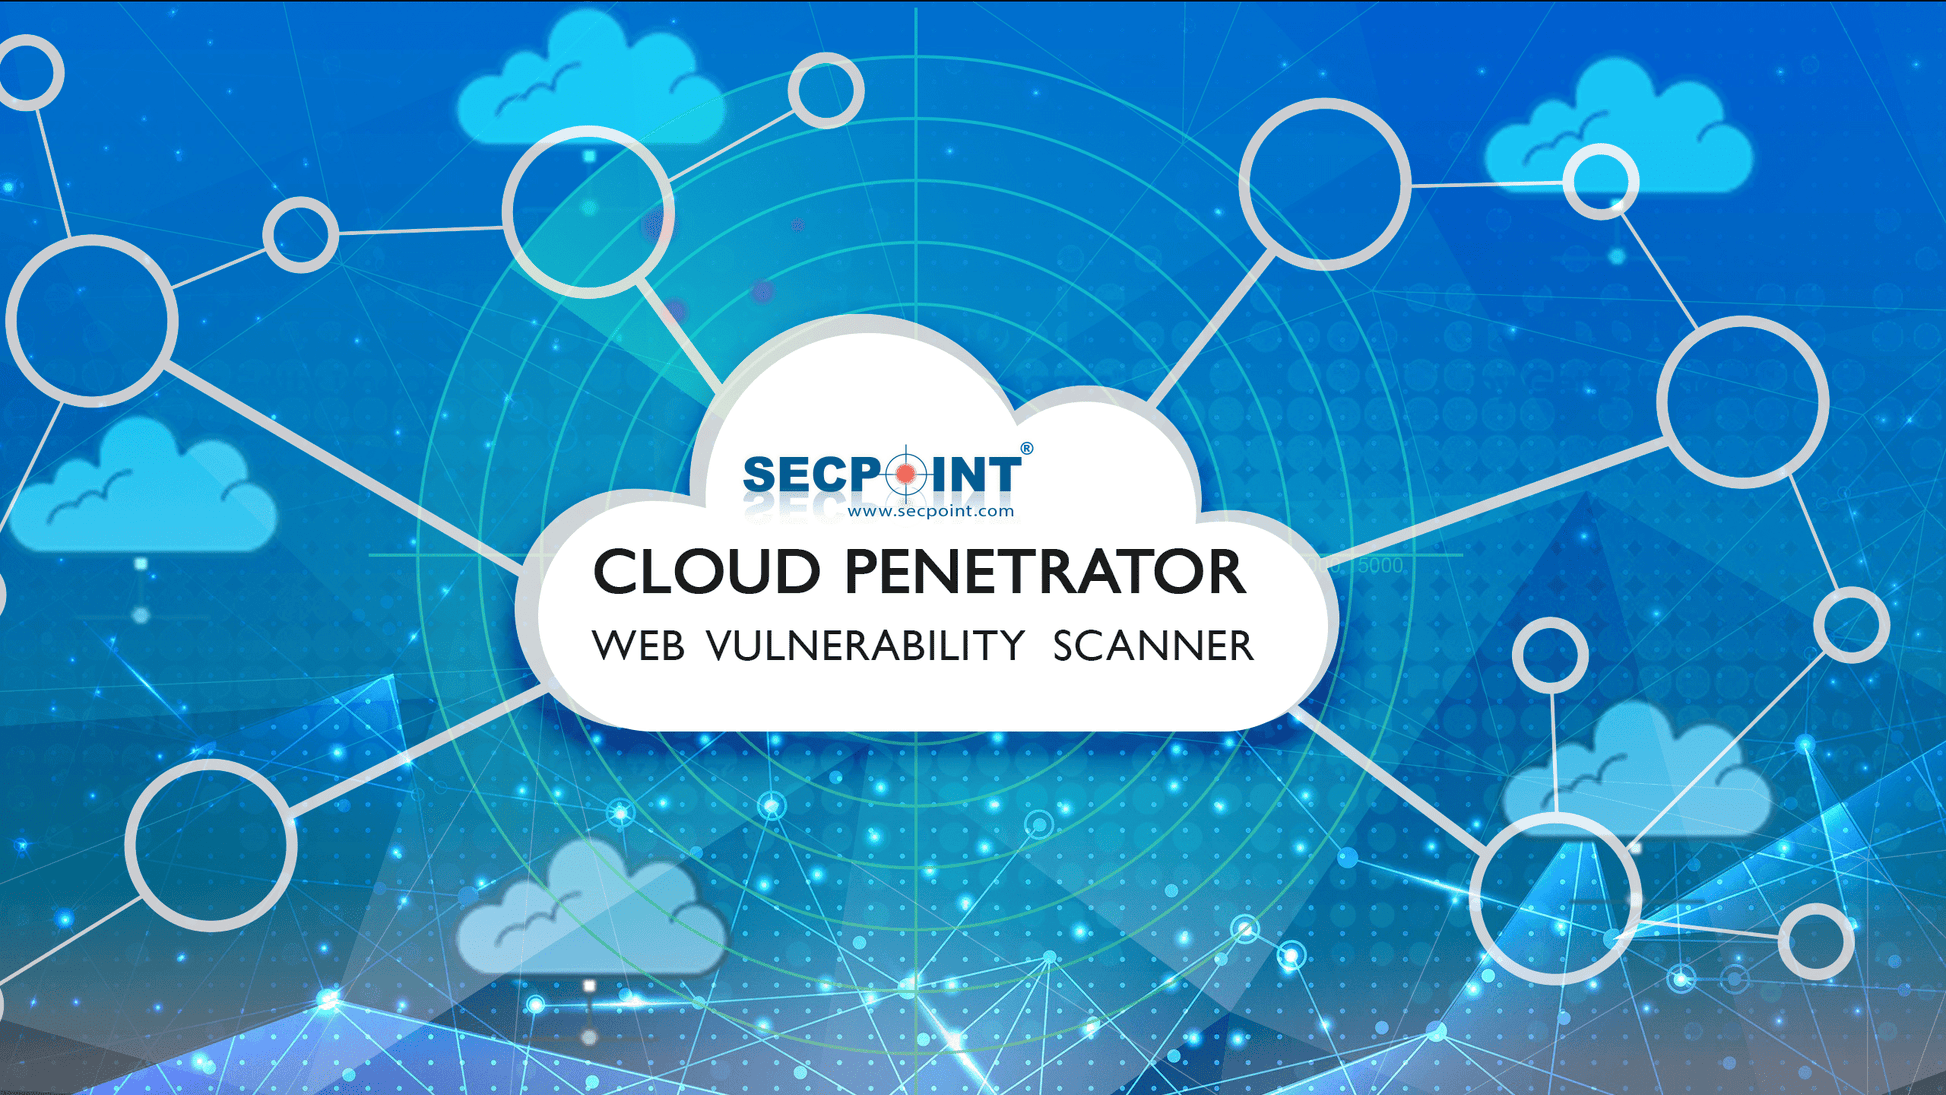 SecPoint Cloud Penetrator S9 - Vulnerability Scanning of 2 IPs for 1 Year Static Scan License - SecPoint